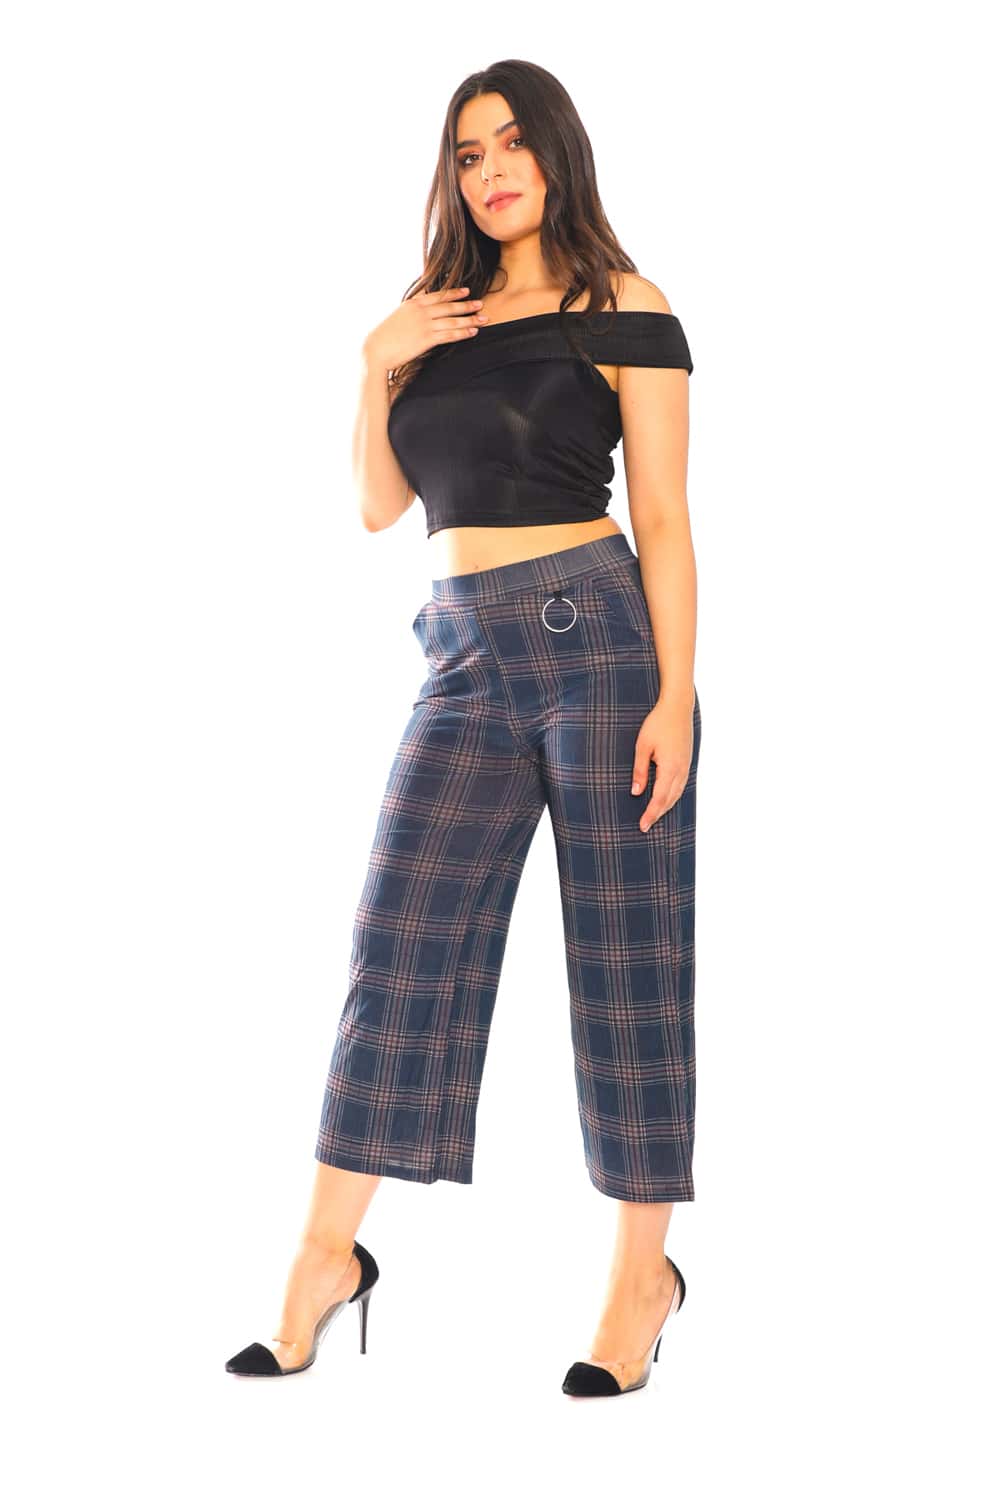 Below Knee Length Culotte Pants with Pockets